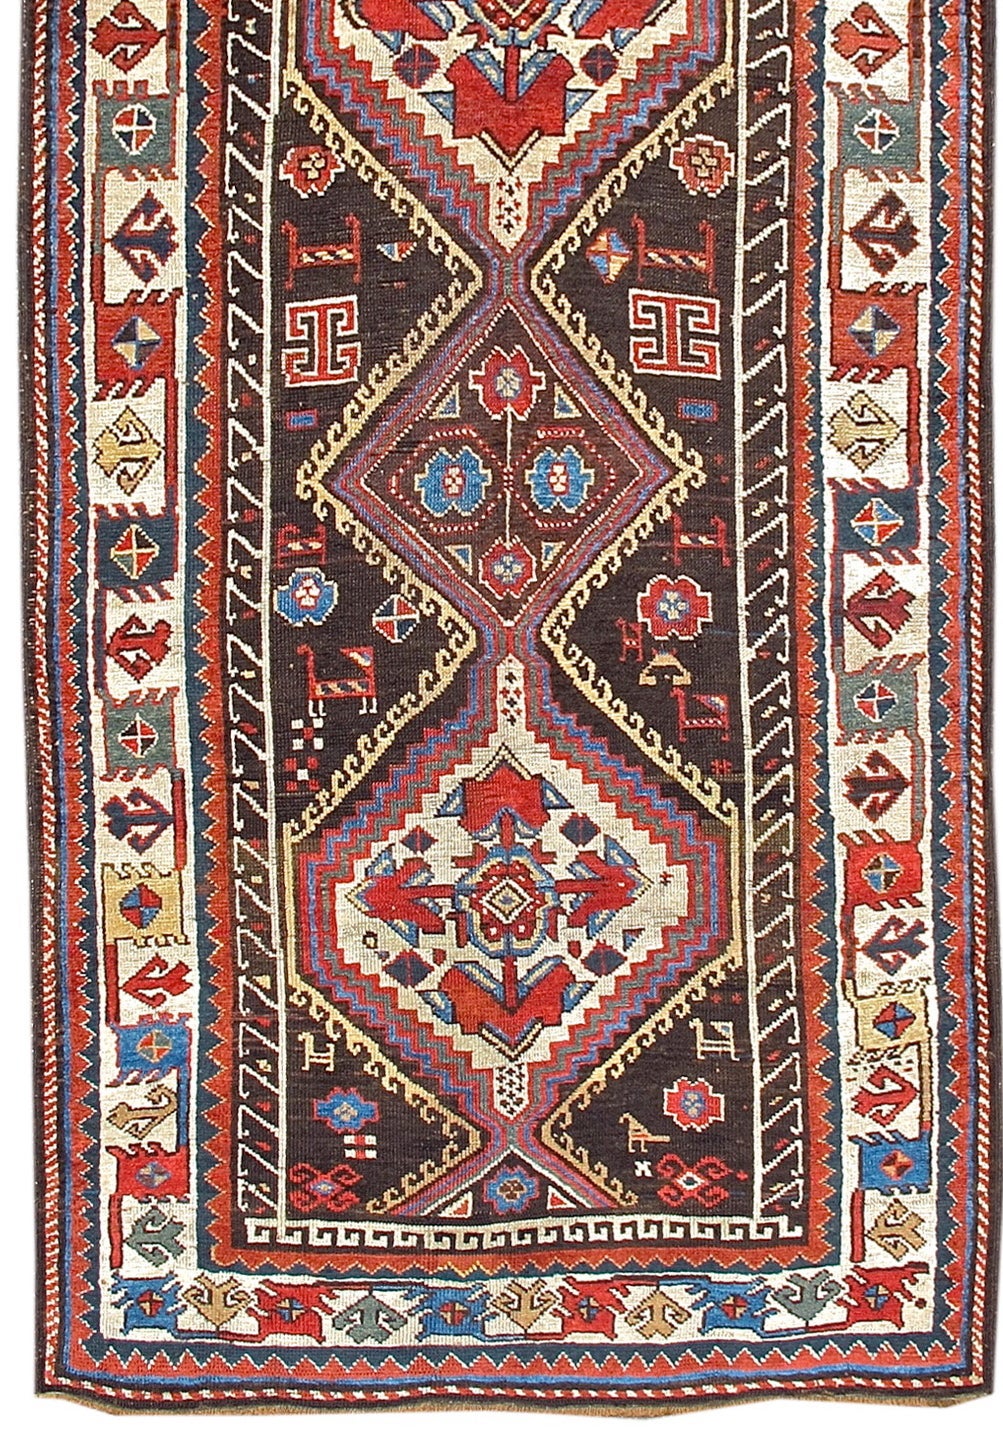 Late 19th Century Transcaucasian Runner Rug with Brown and Blue Field